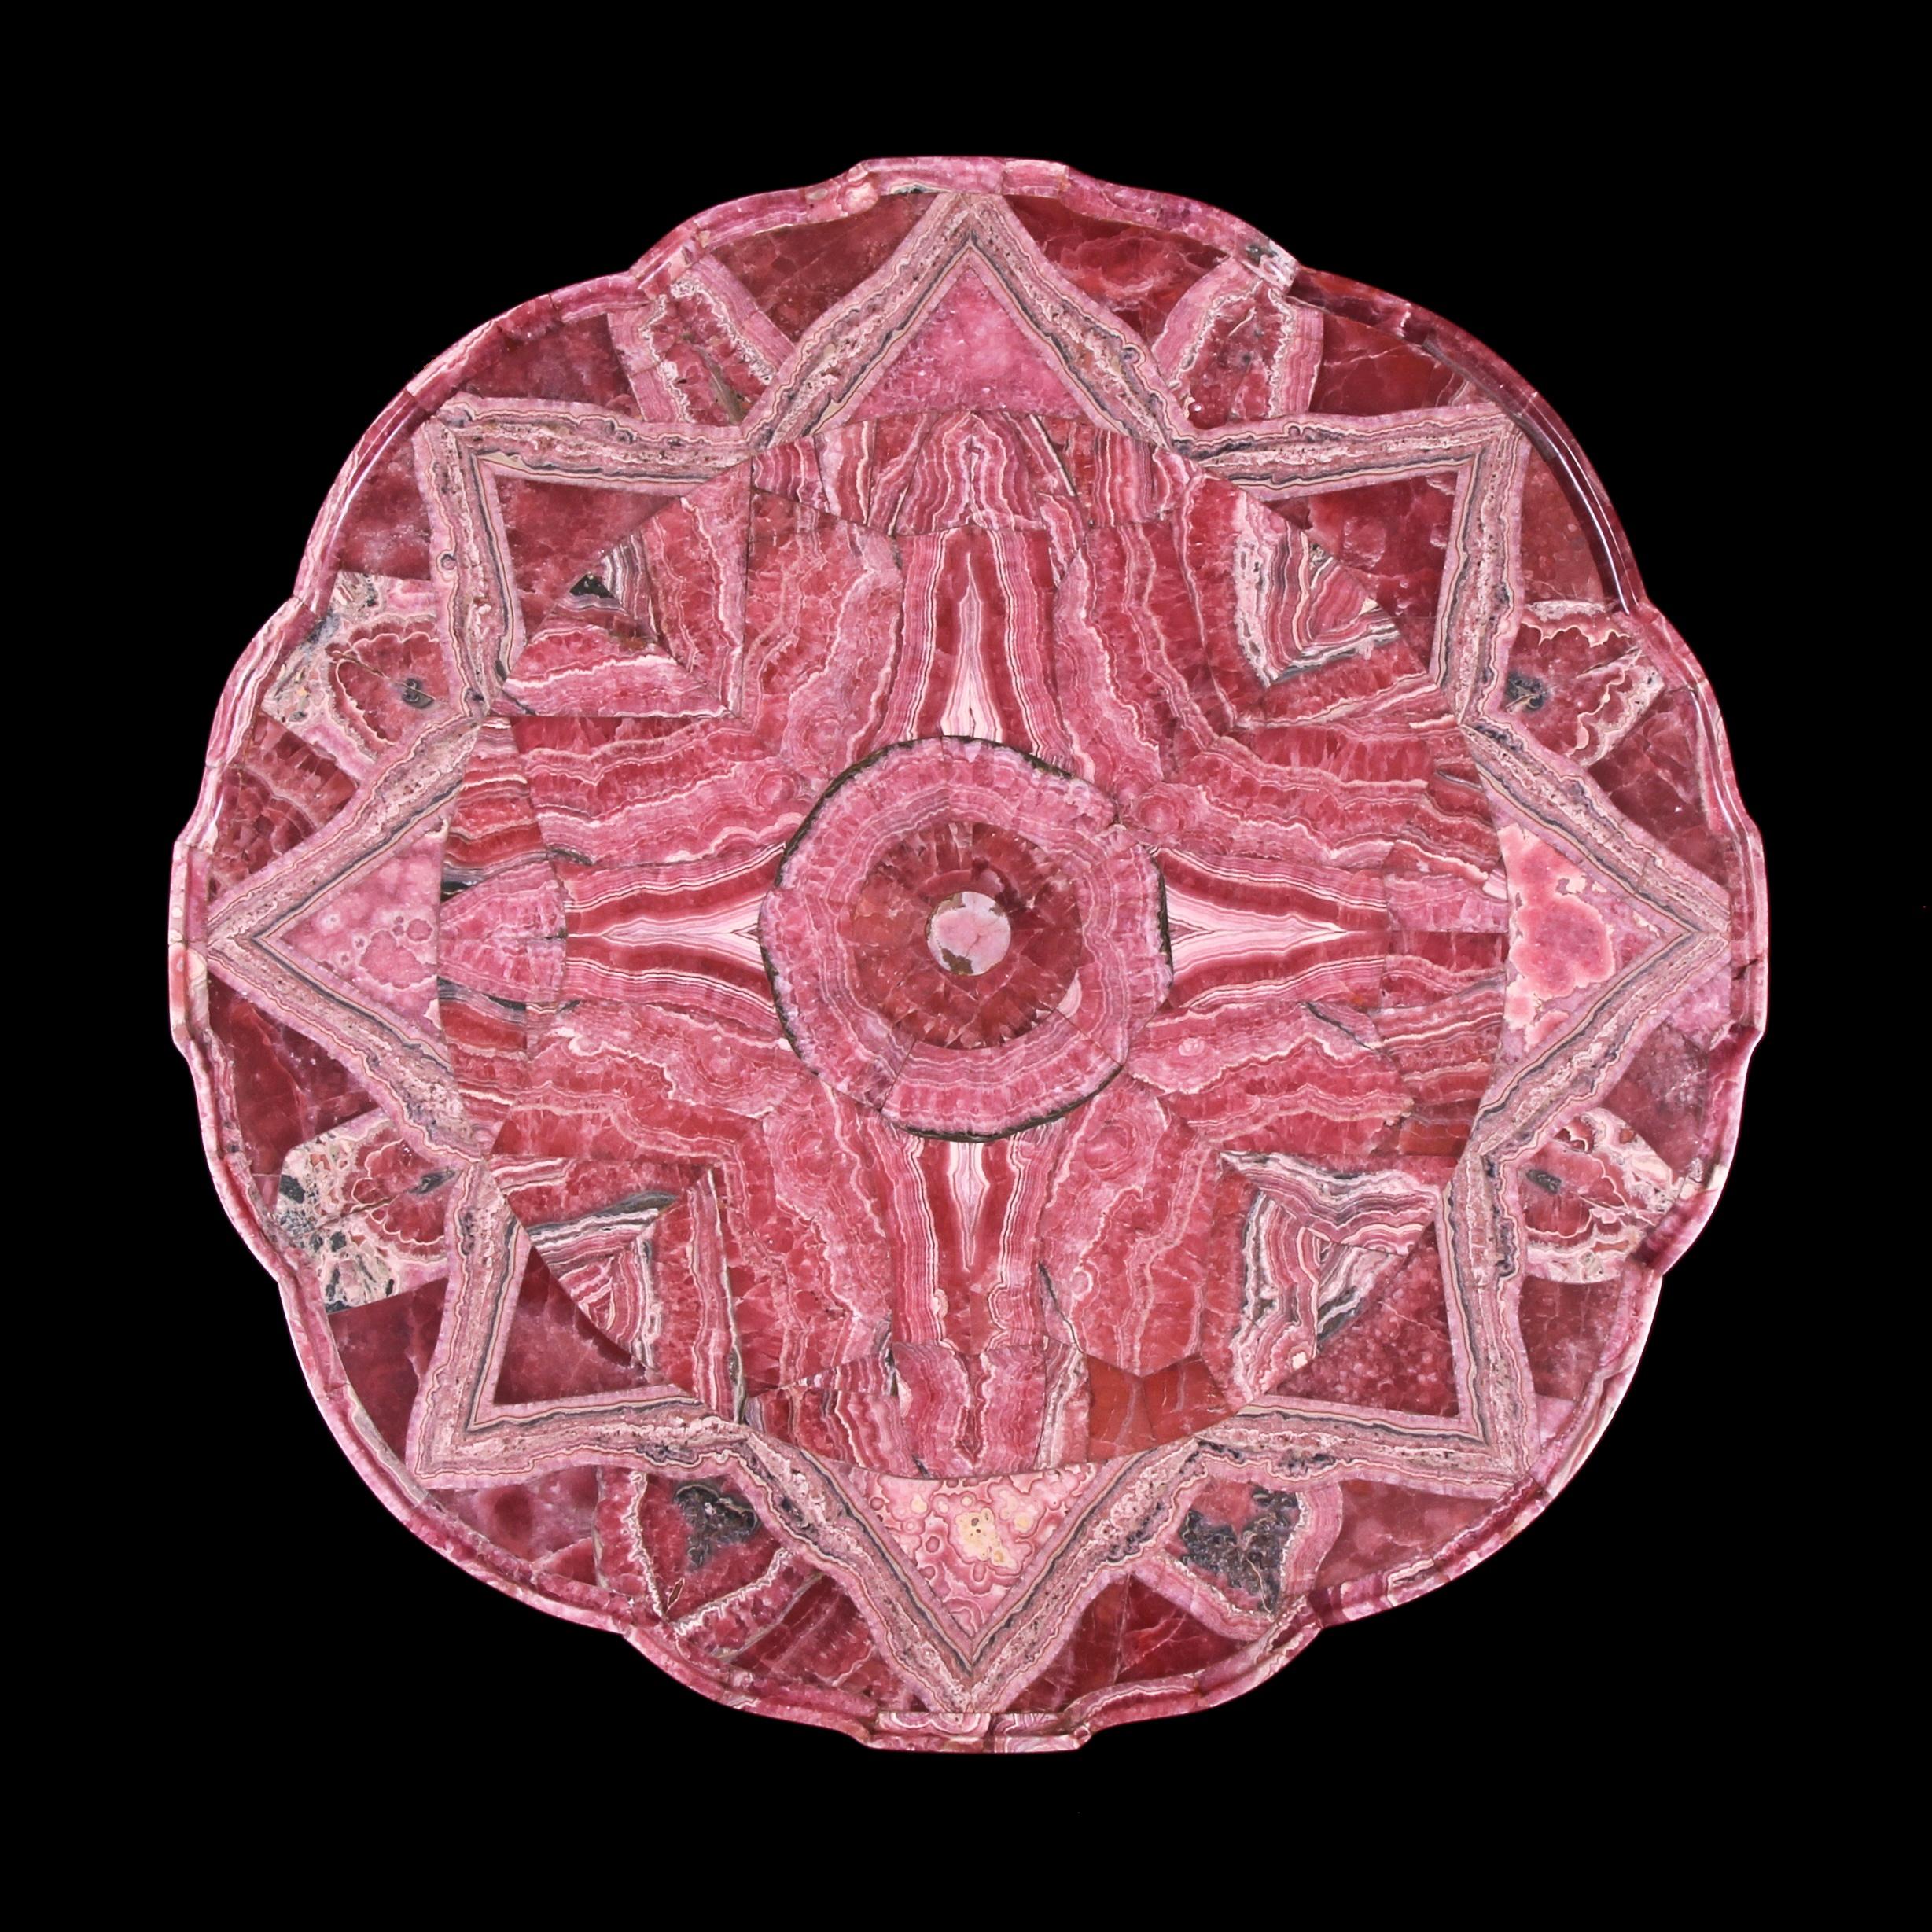 A highly prized gemstone masterpiece of Museum quality and incredible rarity. 

Spectacular & Highly Important Early 20th Century Rhodochrosite Gemstone Plateau / Table Top. Veneered to form an 8 point star design, Shaped with a moulded edge